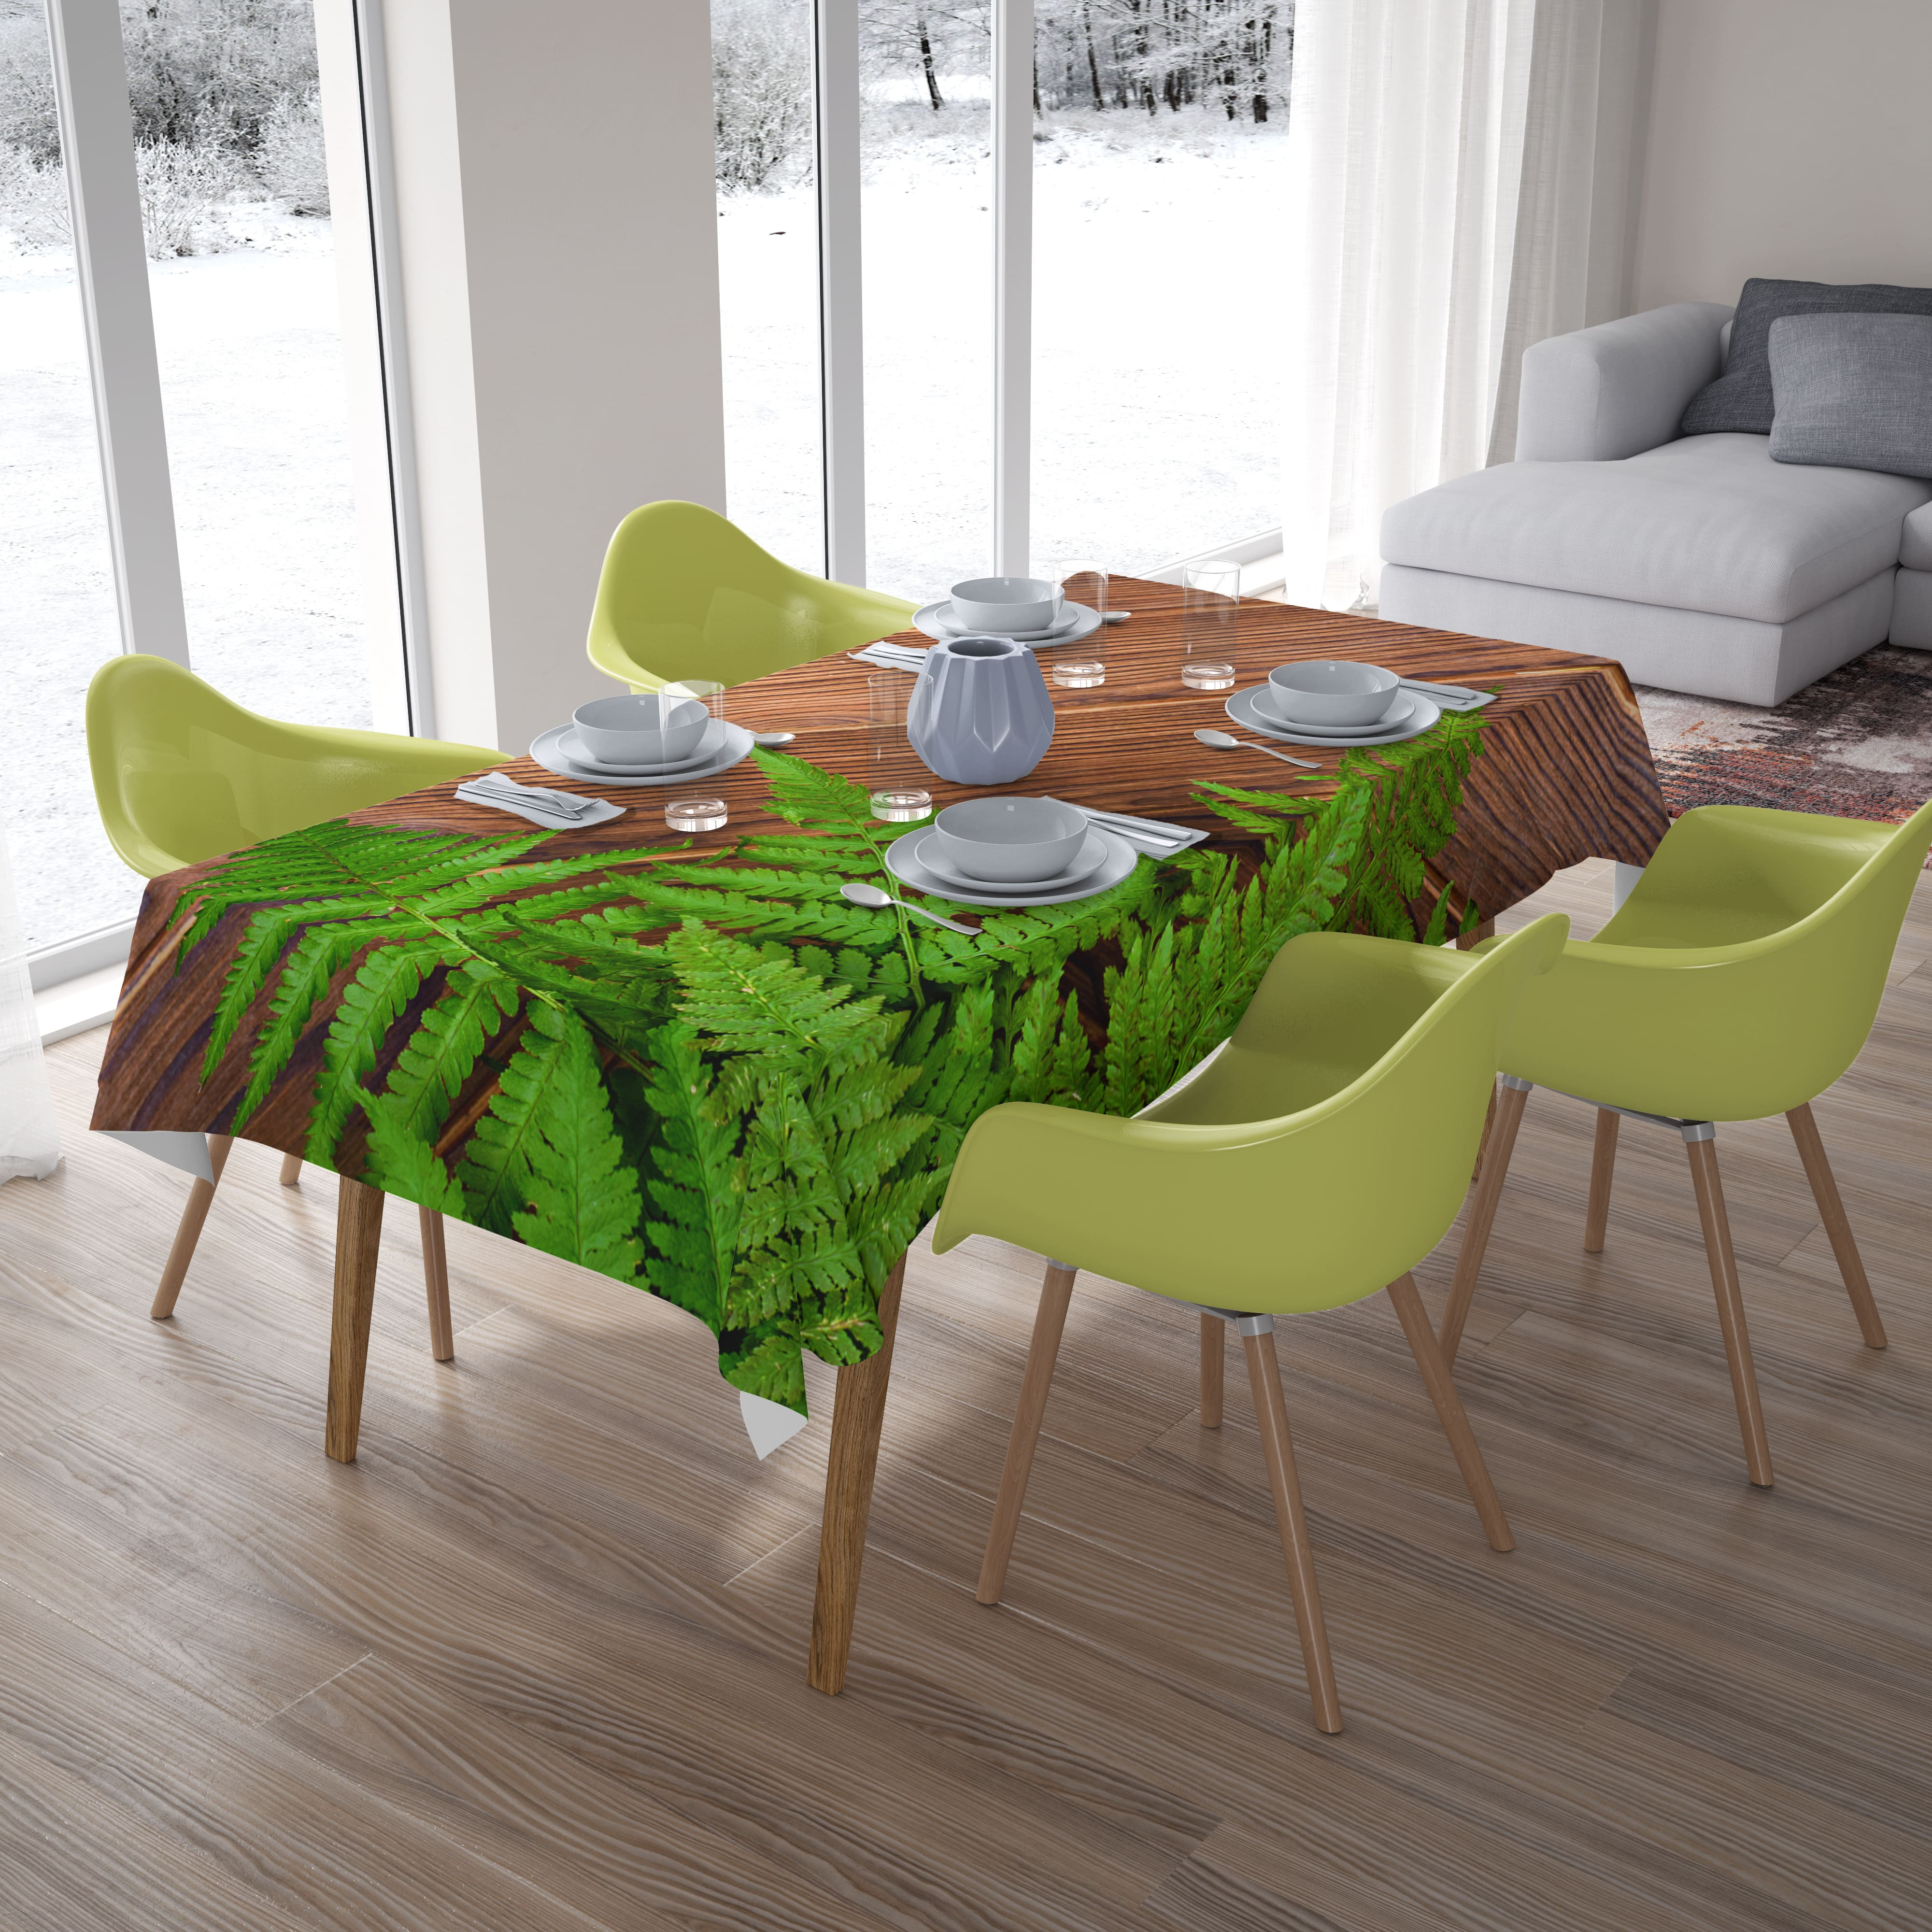 tablecloths - with leaves and flowers